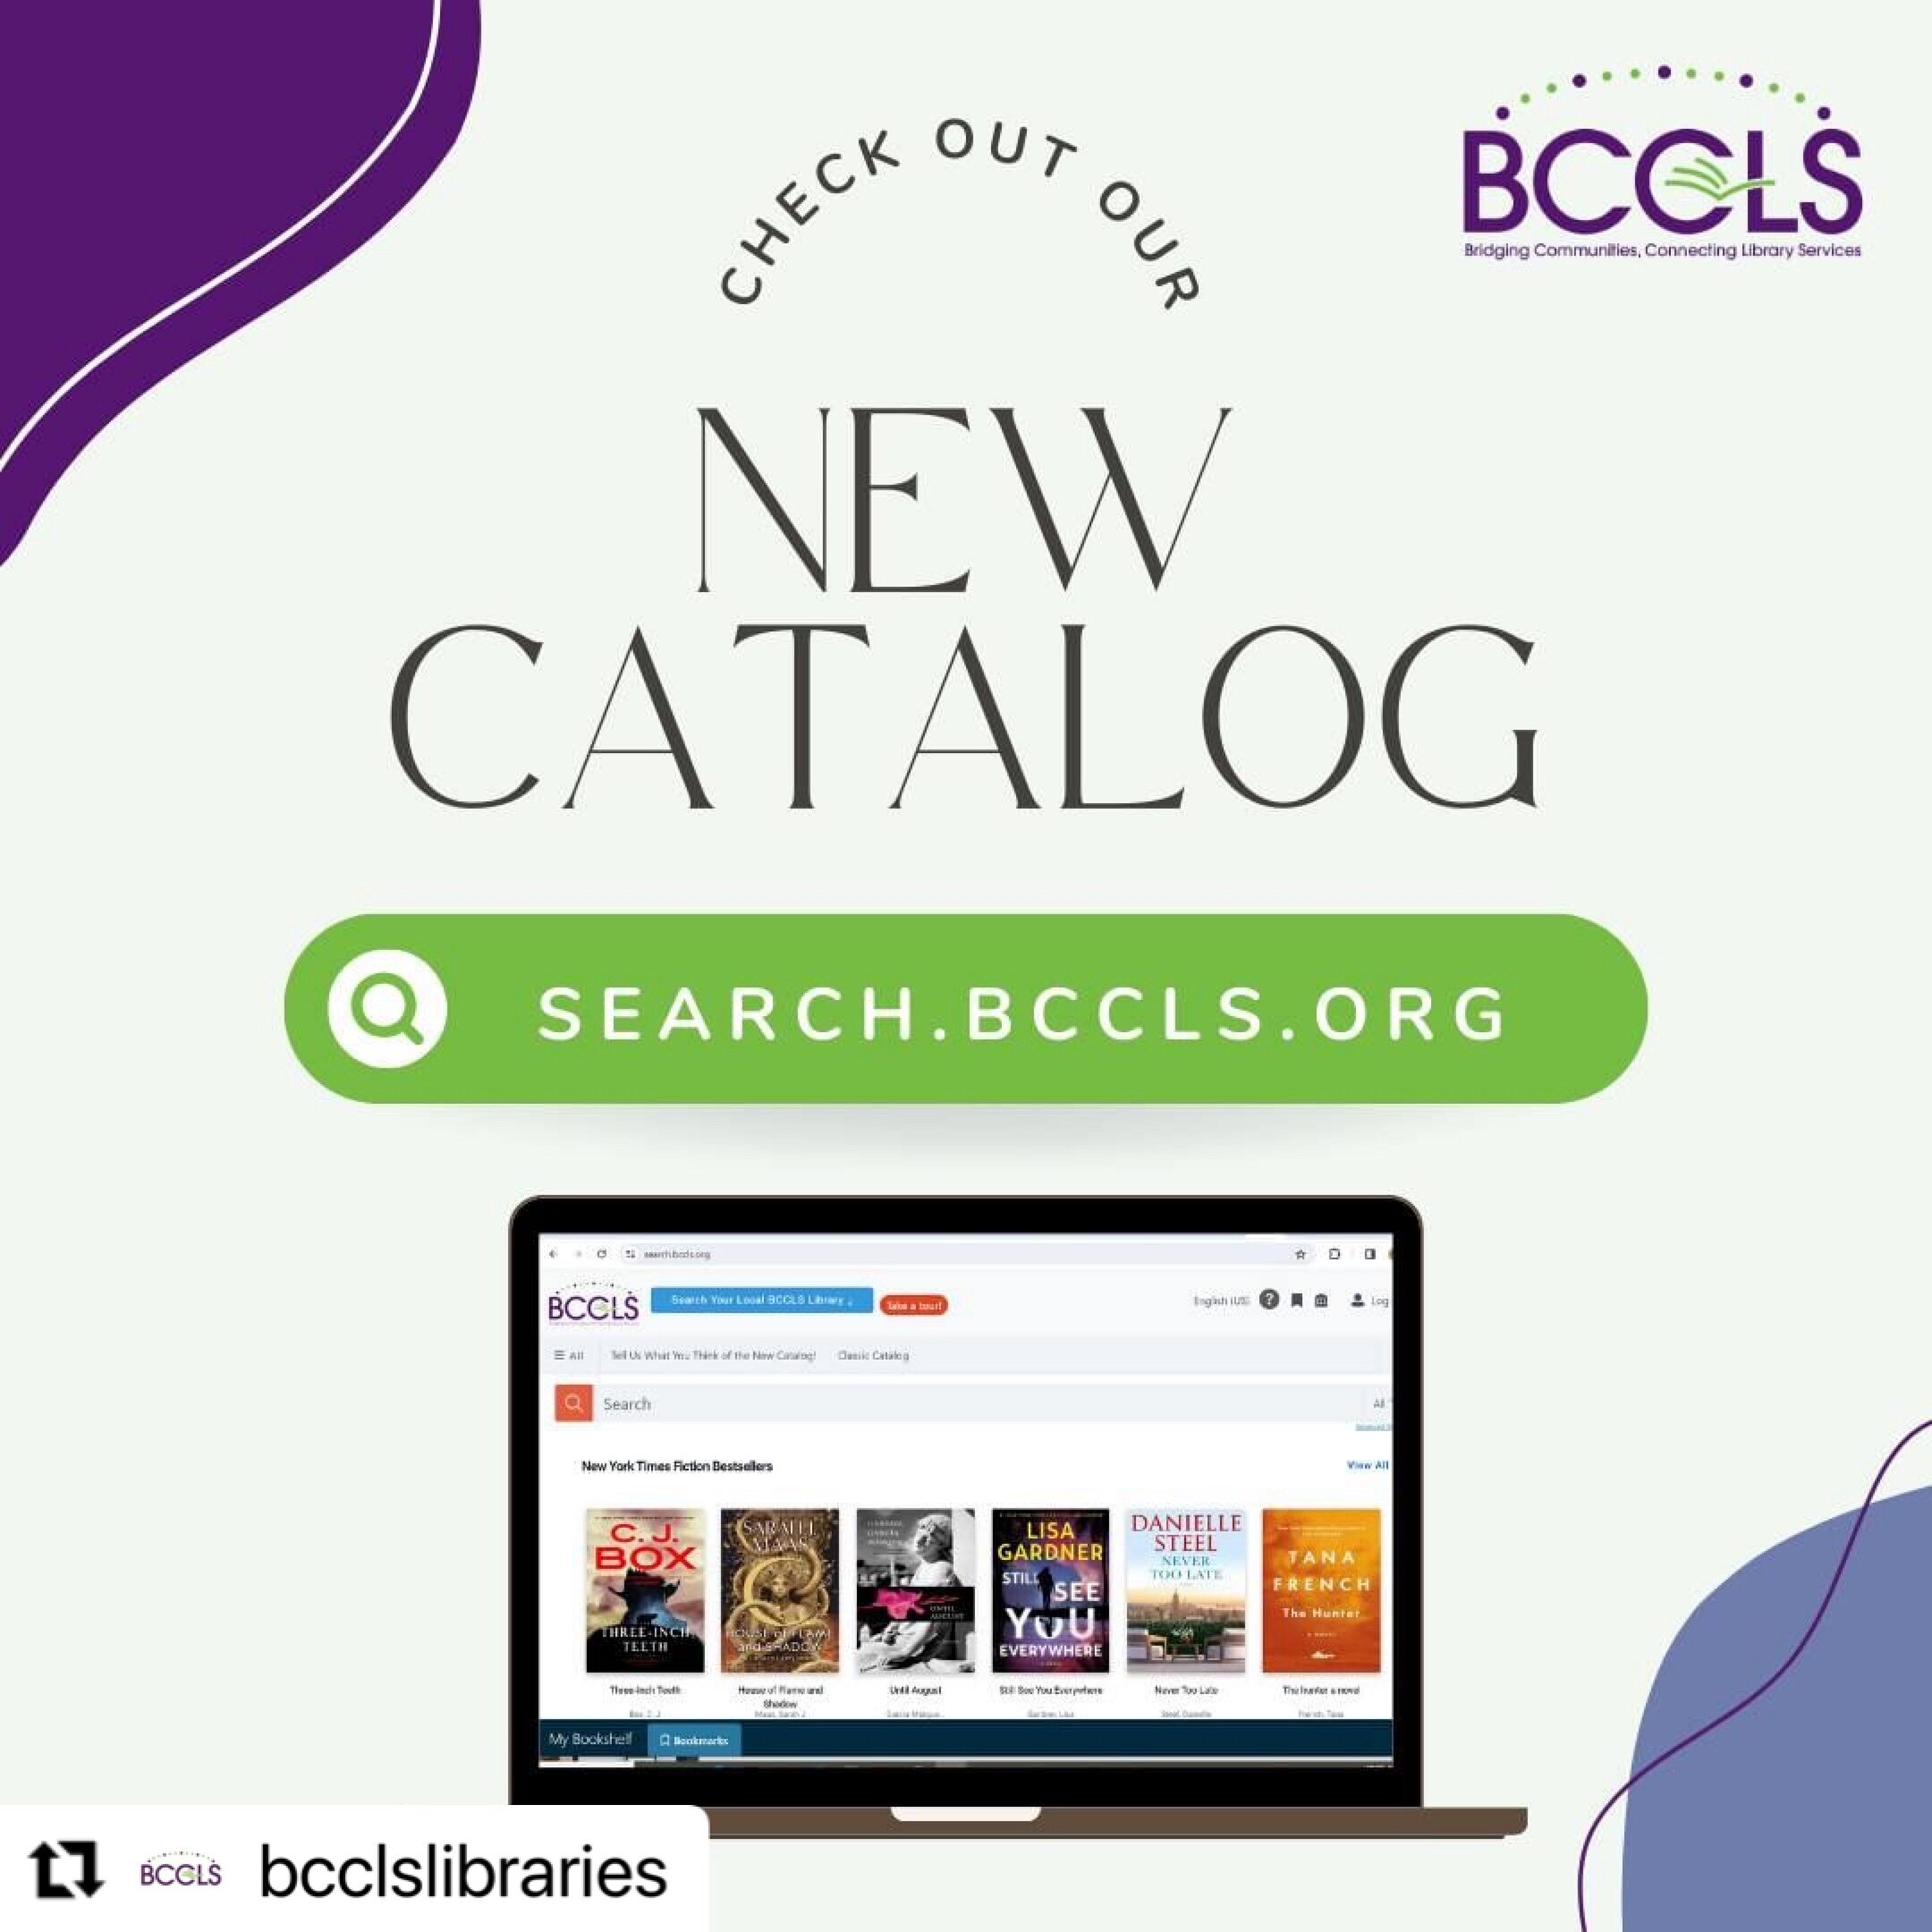 Have you heard? BCCLS has just launched a new online catalog! 📚 Check it out now and find your next great library read! @bcclslibraries 

#BCCLS #BCCLSLibraries